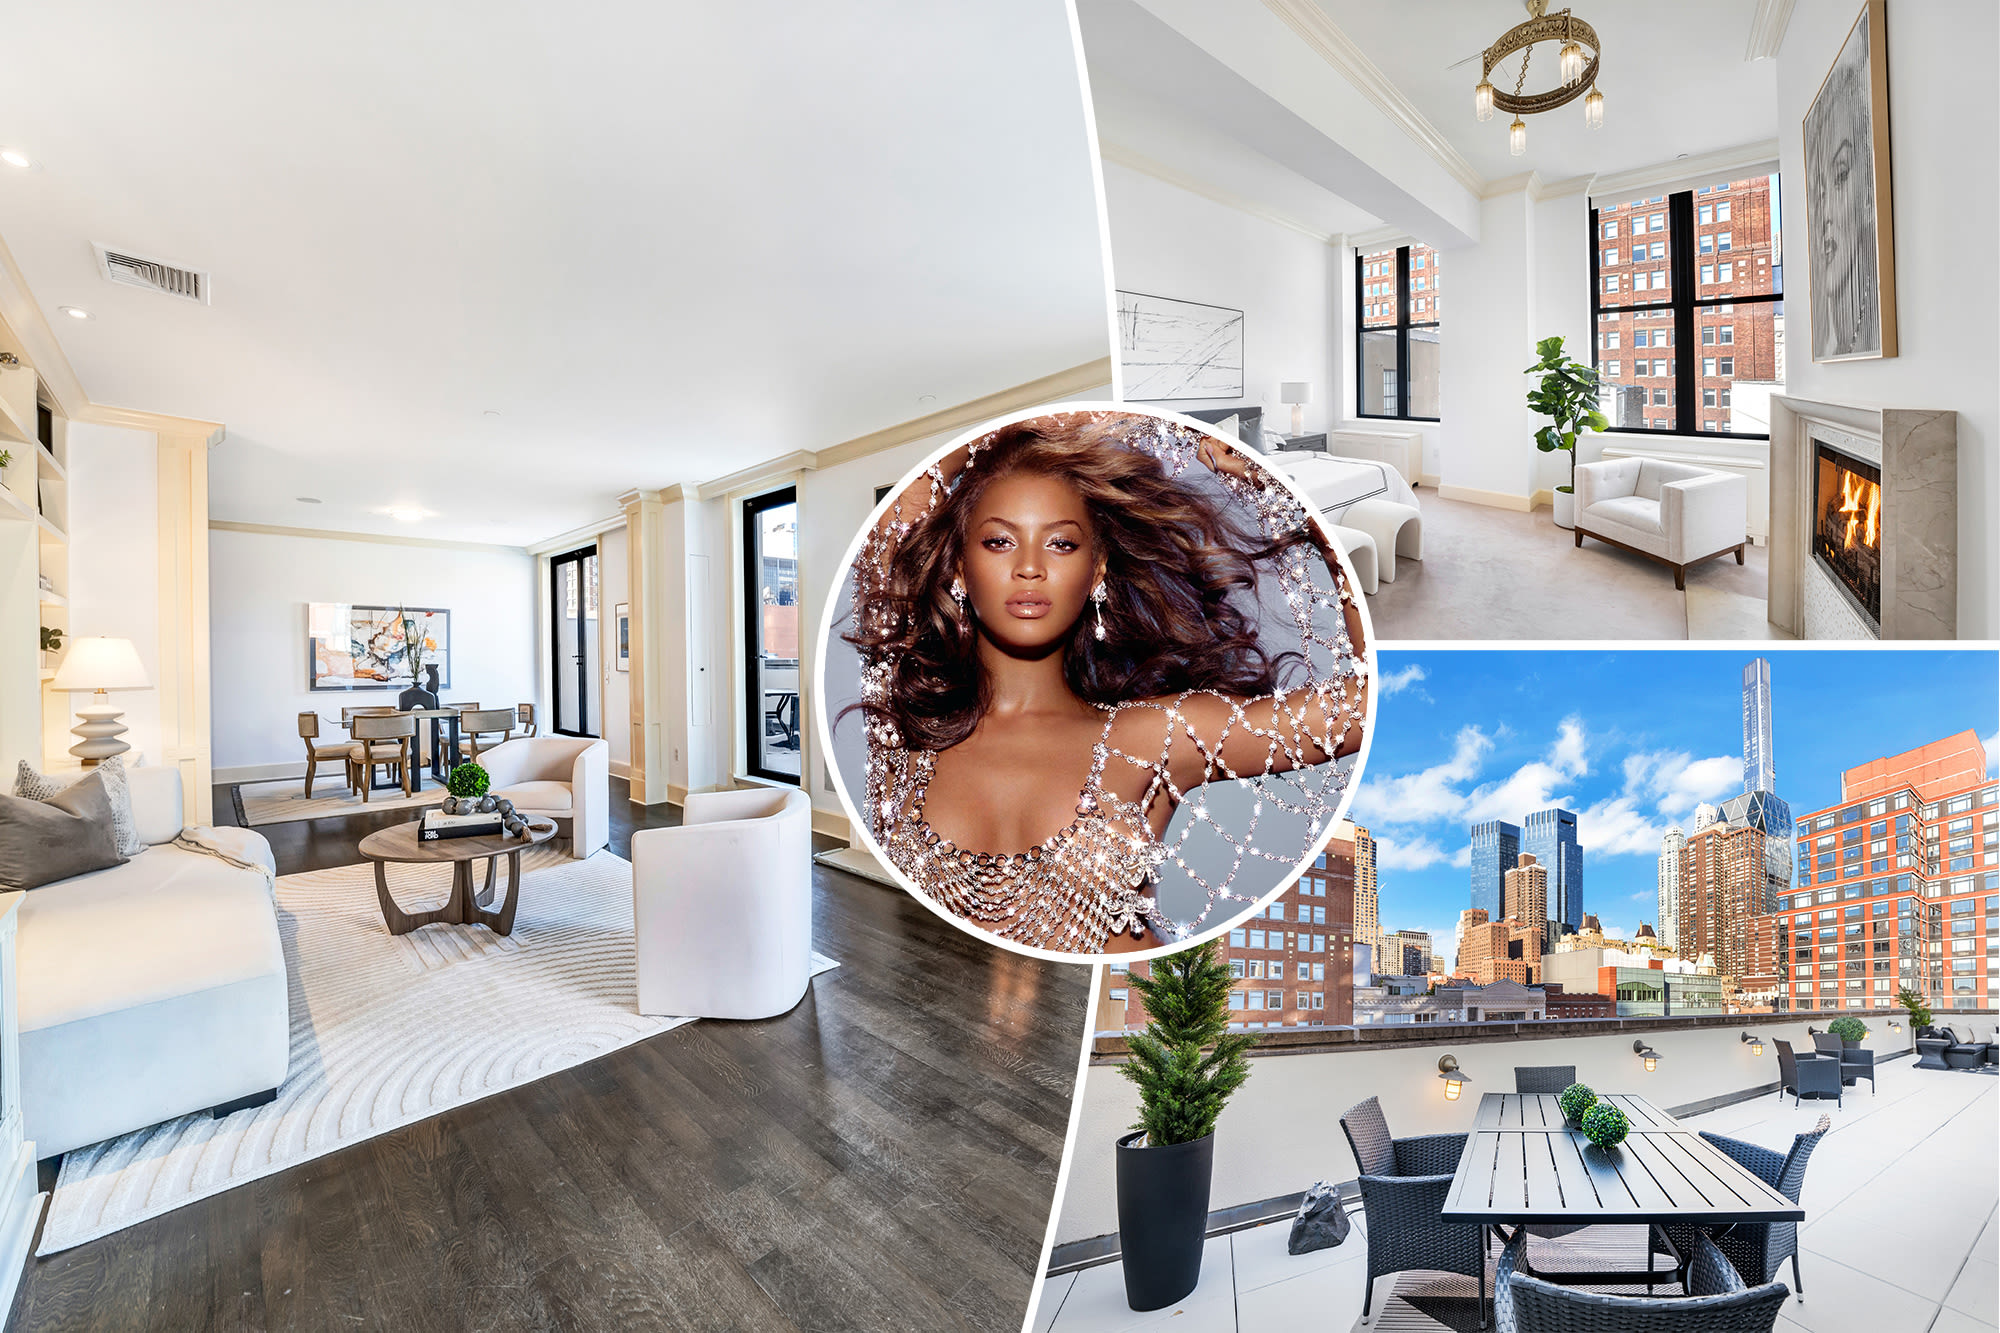 Beyoncé’s ‘Dangerously in Love’ was recorded in this NYC building — where a glam penthouse now asks $3.99M